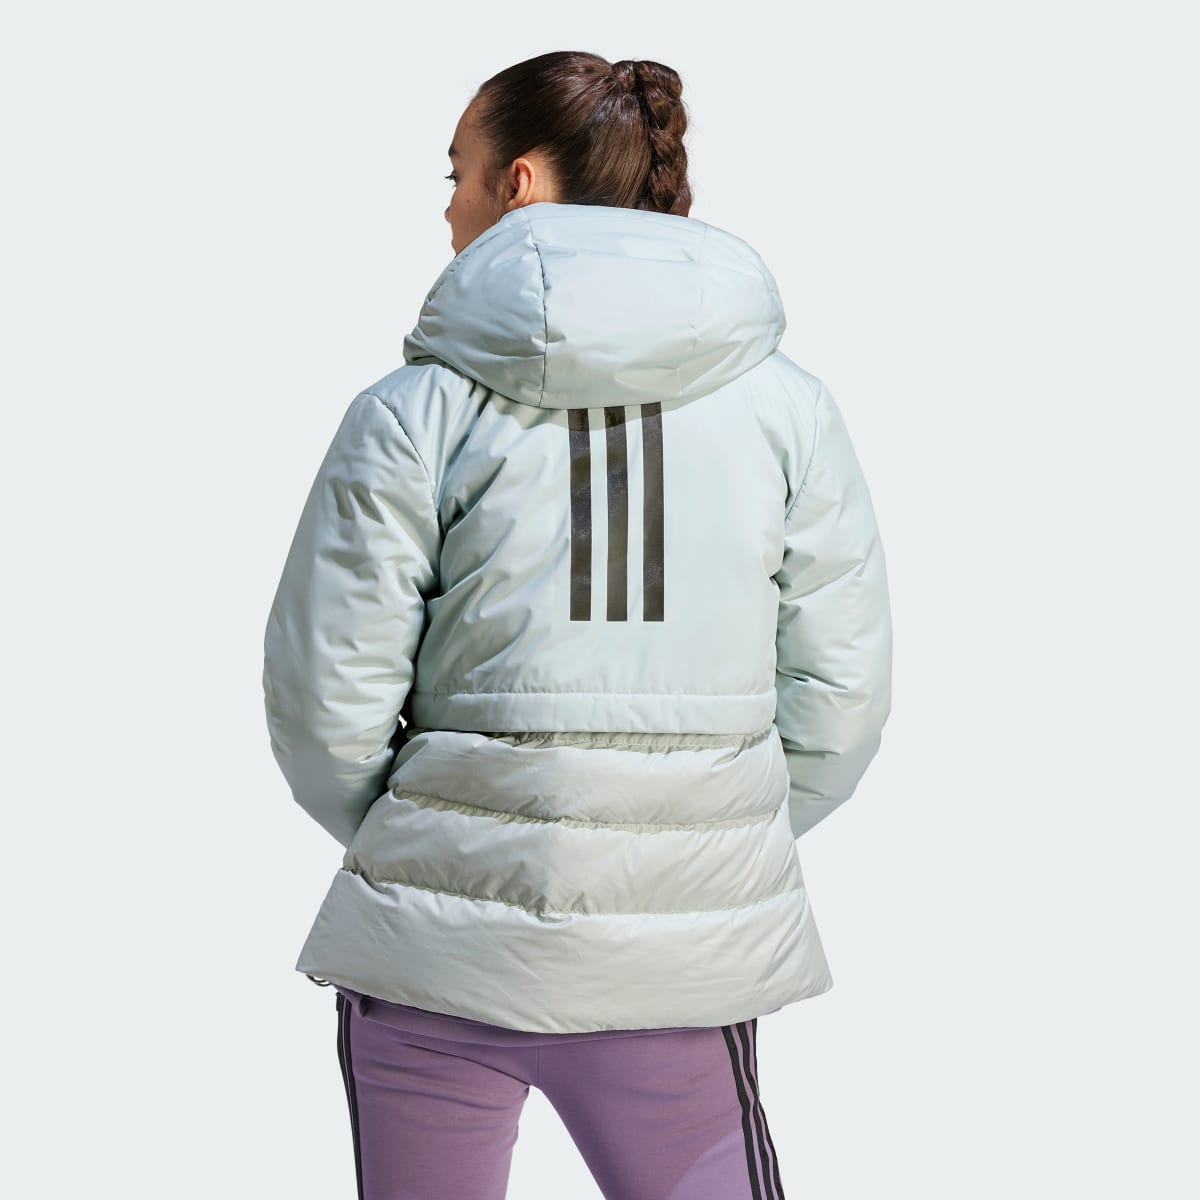 Adidas Traveer COLD.RDY Jacket. 5